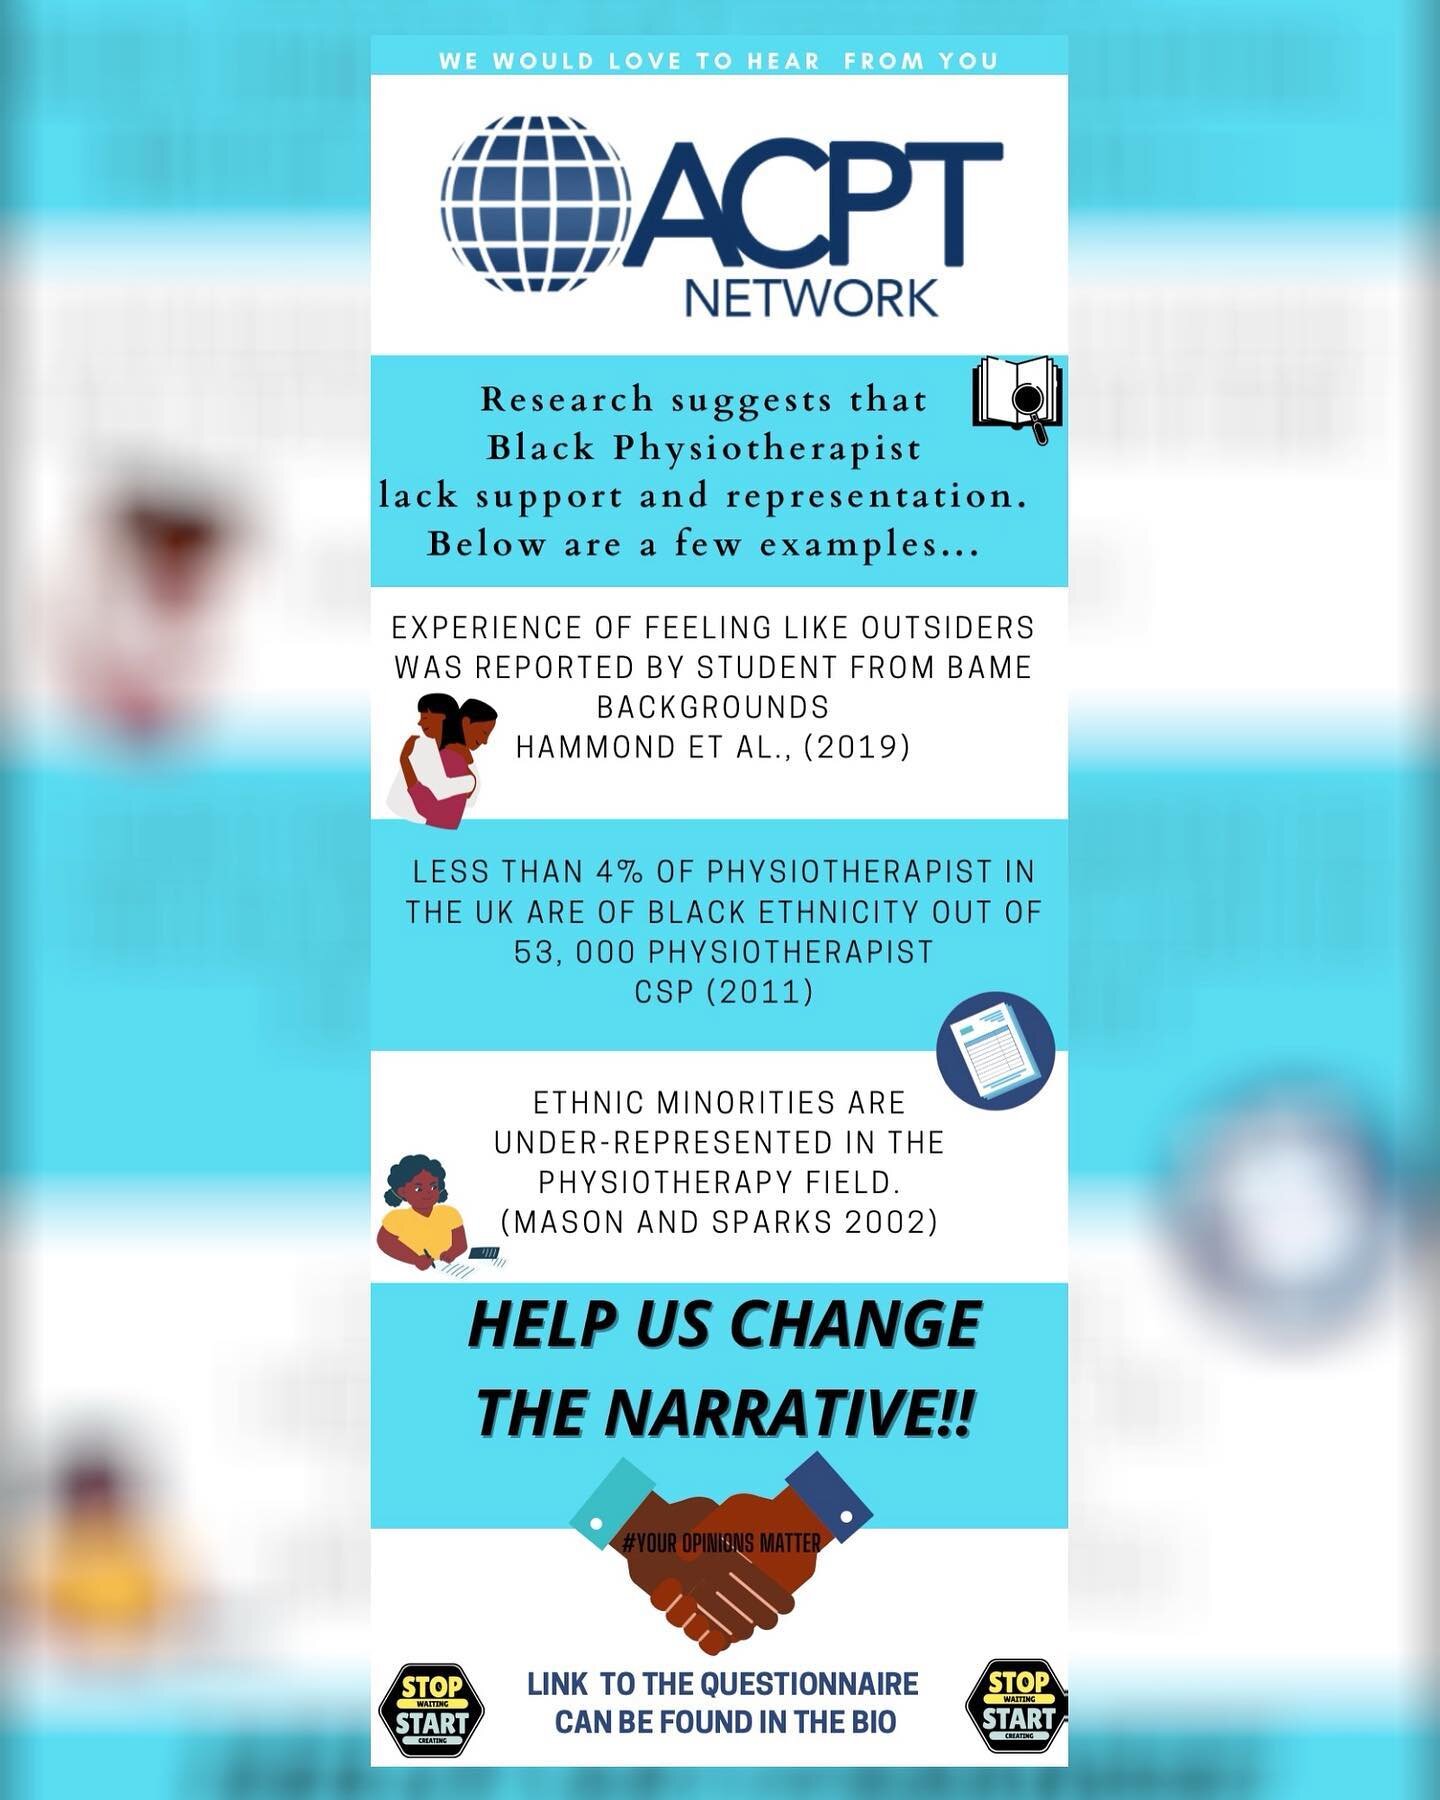 ✨ Help us be part of the narrative! ✨
⠀
 🔹Link in bio 🔹
⠀
⠀
⠀
#acptnetwork #youropinionmatters #representationmatters #physiotherapists #BlackAHP #makingadifference #forusbyus #research #ahp #explore #explorepage